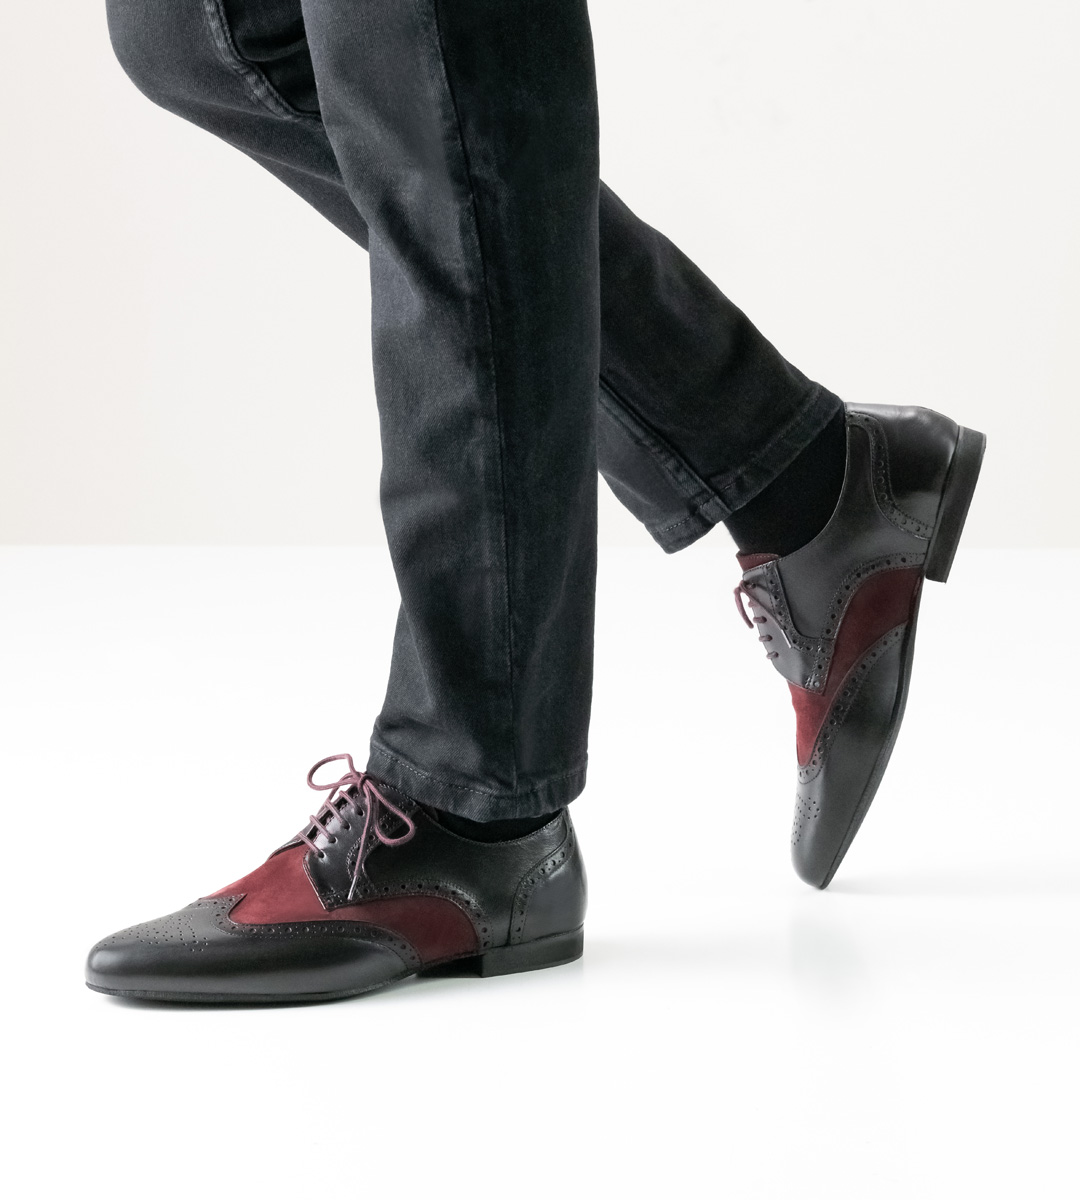 black-bordo coloured men's dance shoe by Werner Kern in combination with black jeans